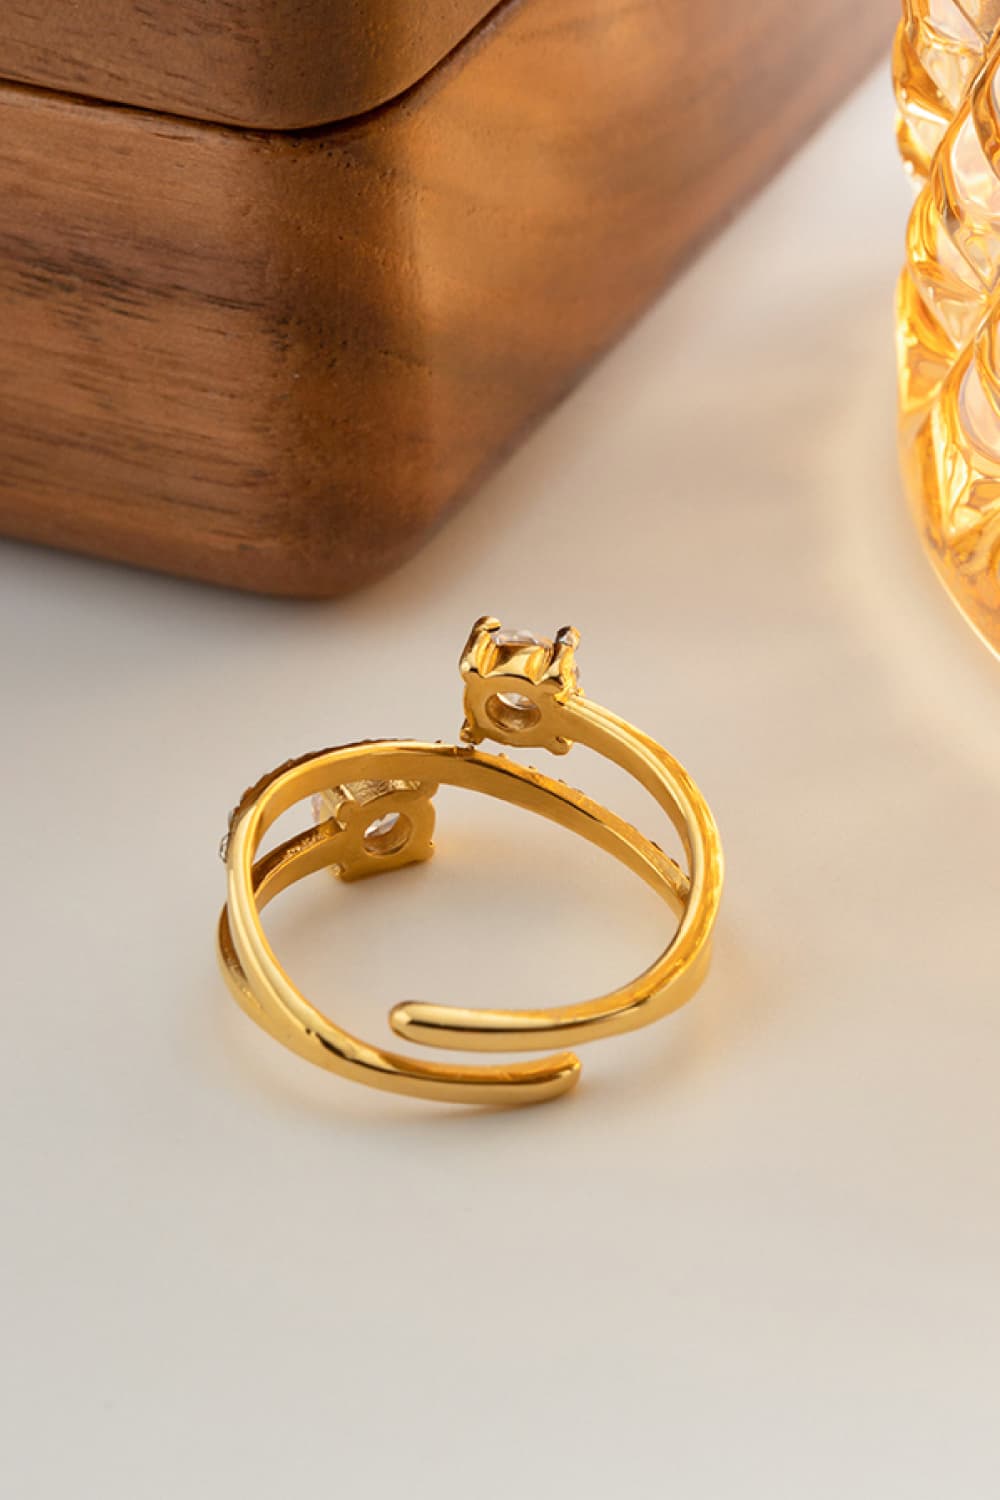 Bypass Ring: A type of ring with a design where the two ends of the band appear to overlap or bypass each other, creating a unique and stylish look.